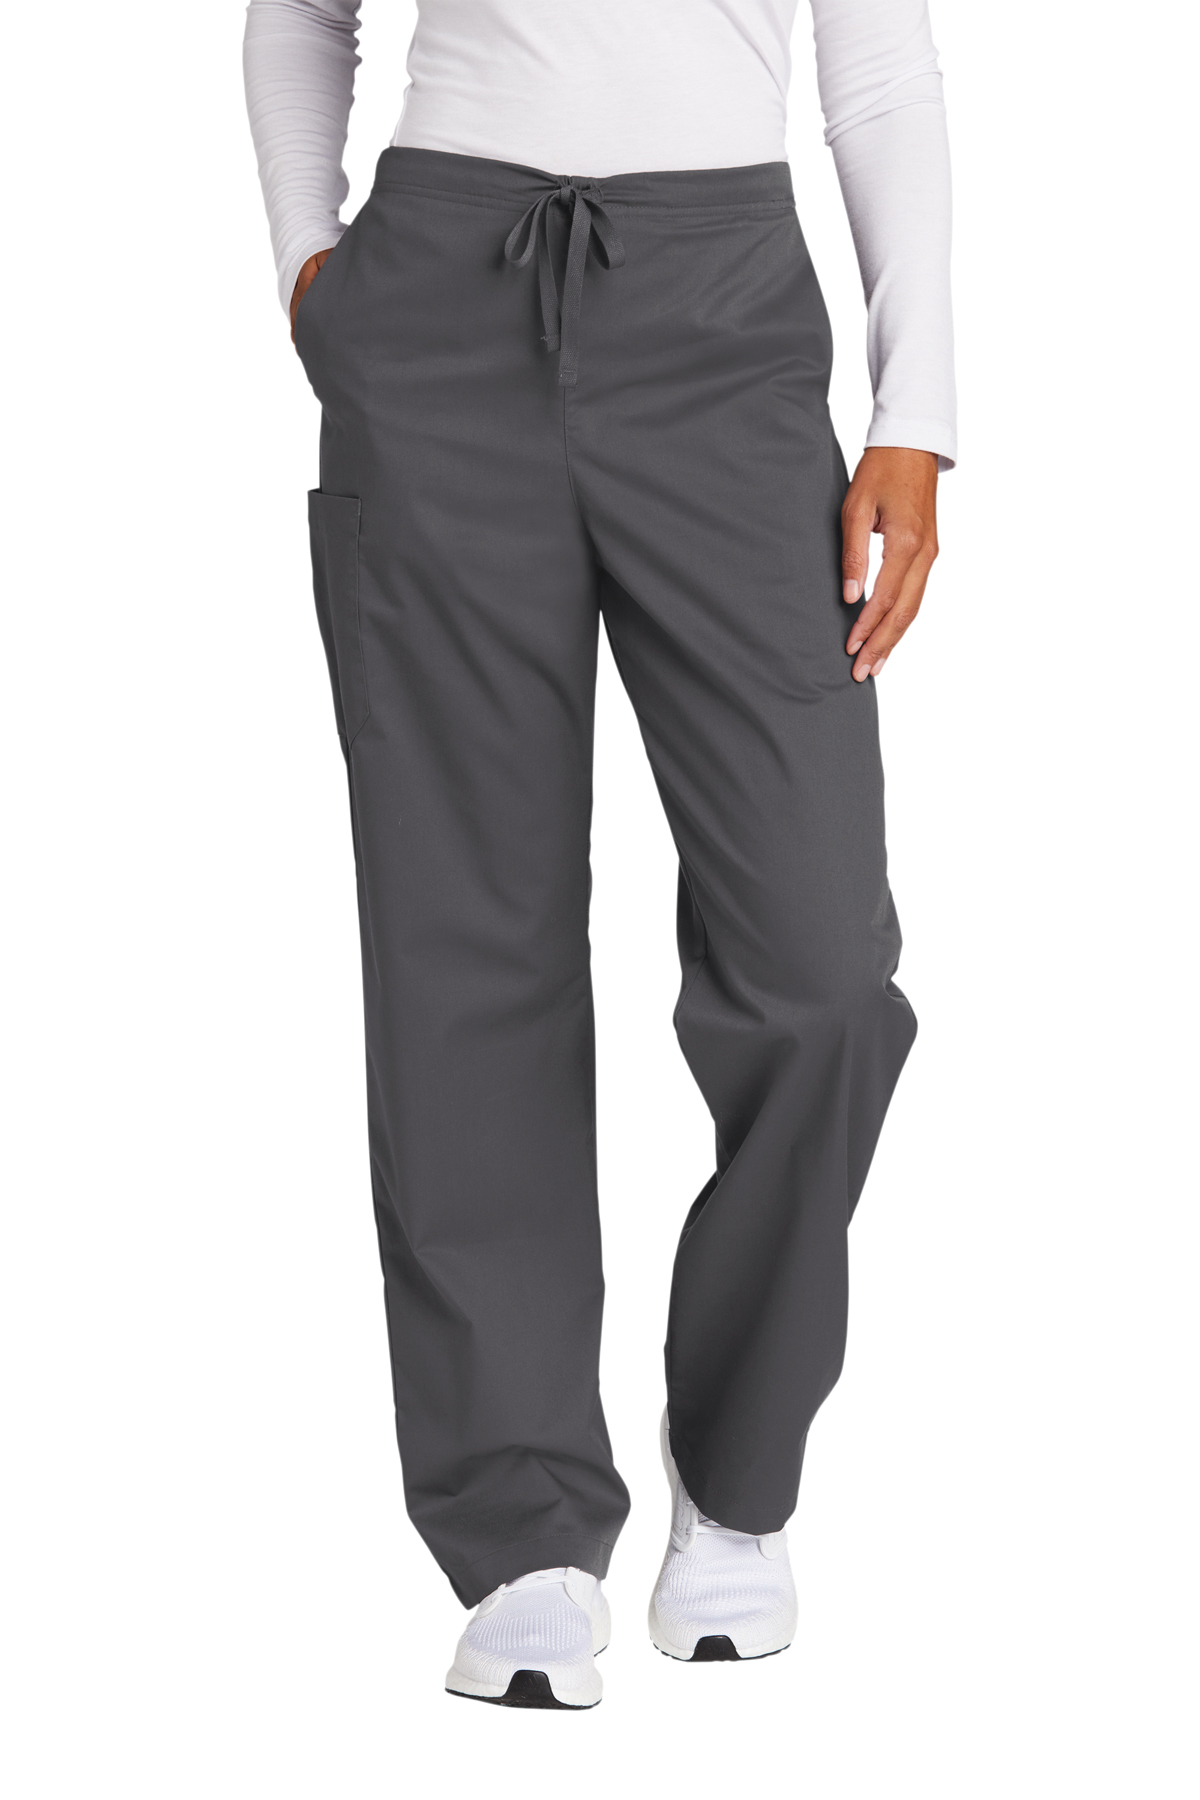 Wink Unisex Short WorkFlex Cargo Pant | Product | Company Casuals